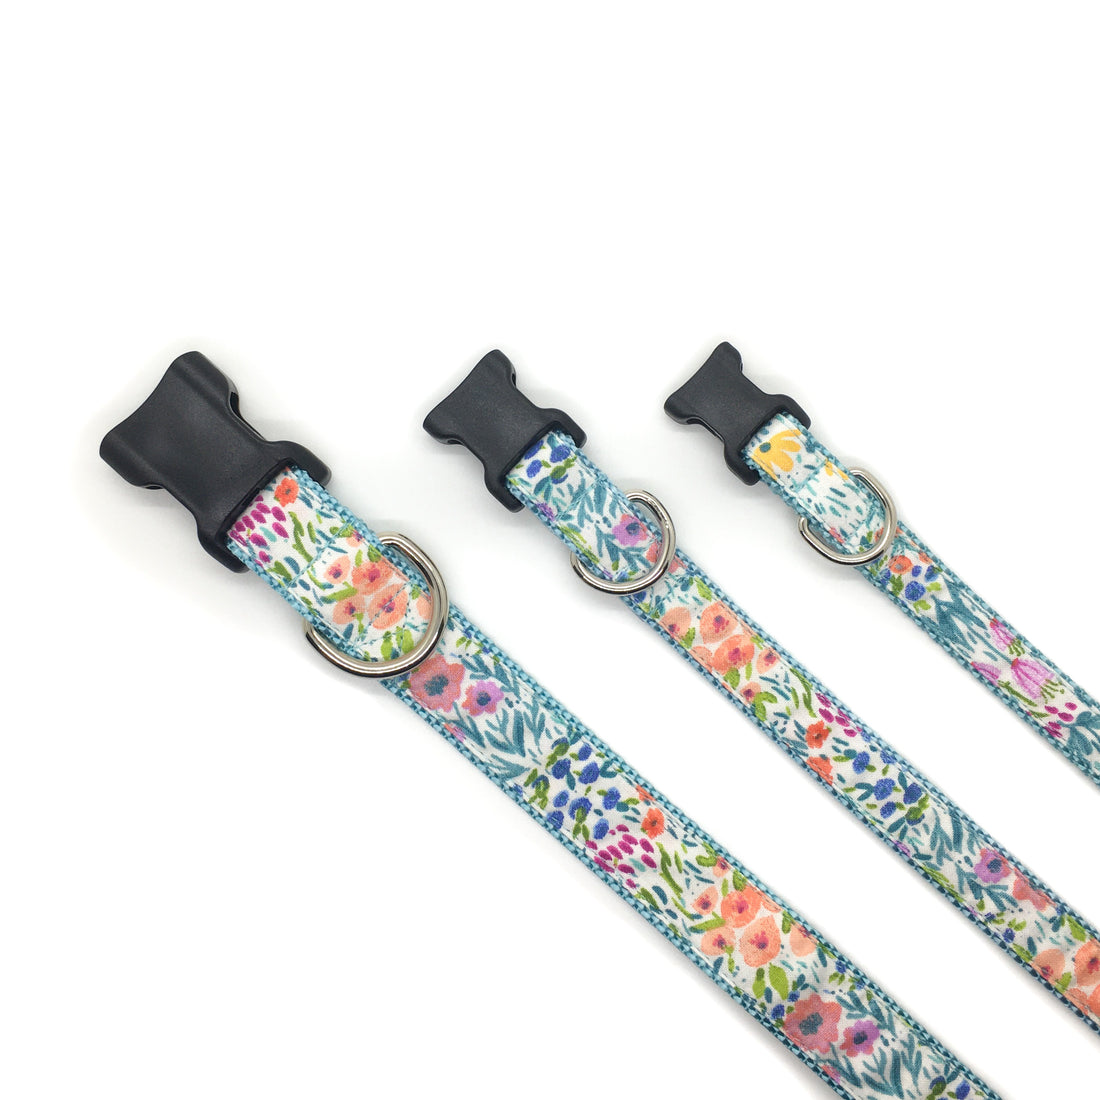 Persnickety Pets - flower garden classic dog collar, 3 sizes